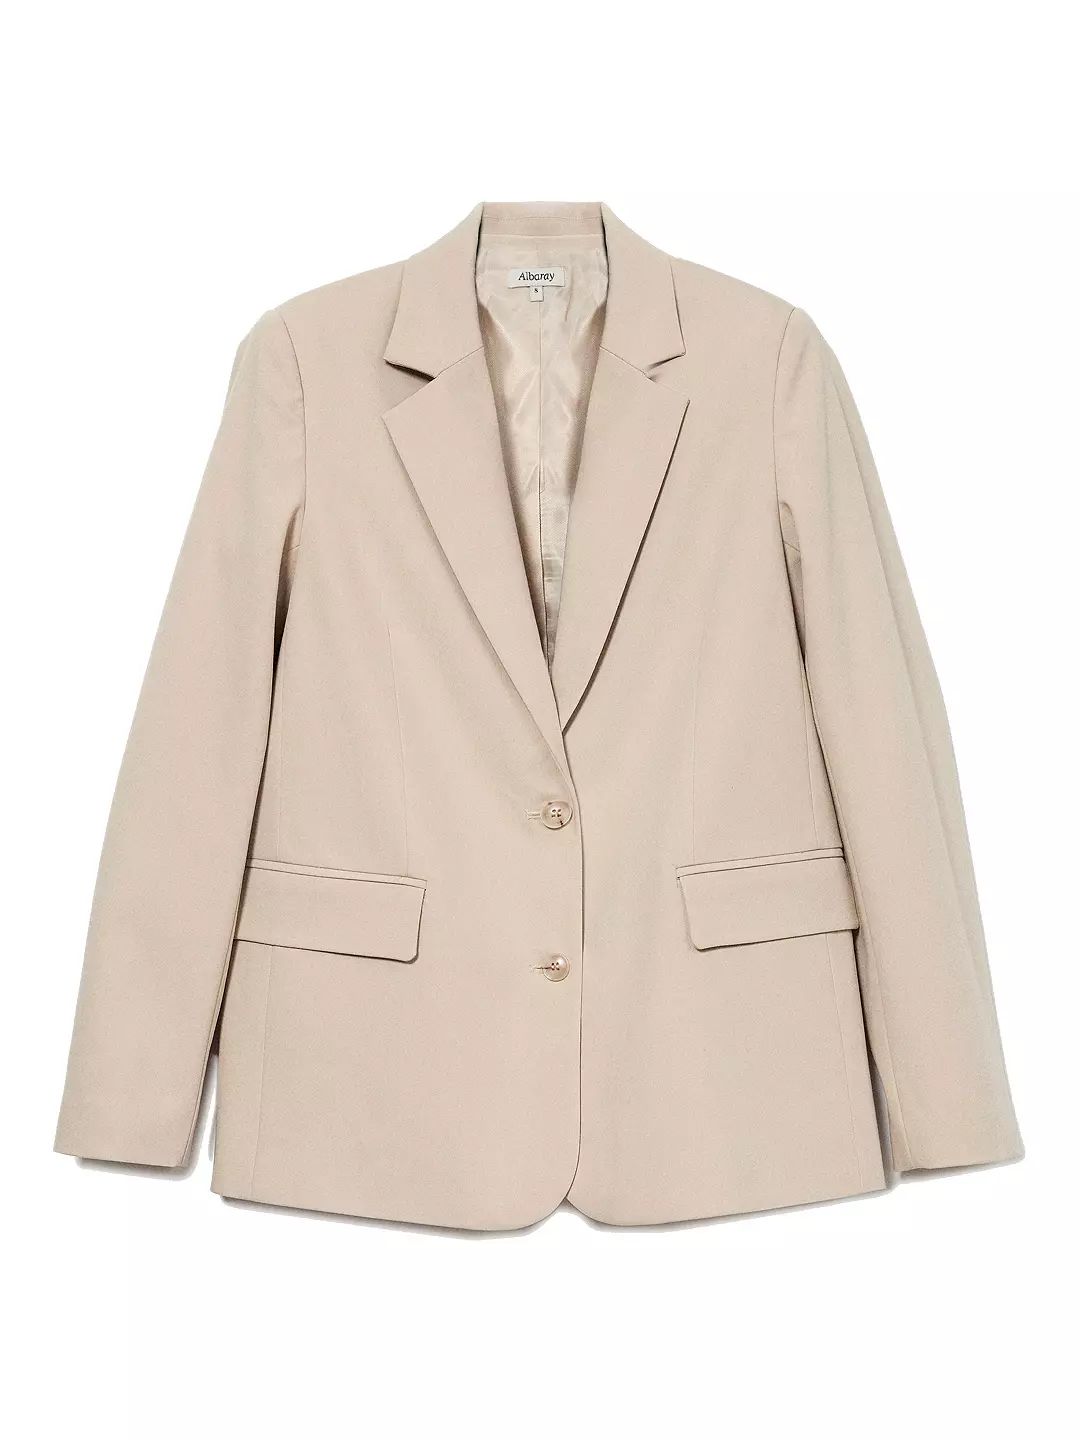 Albaray Relaxed Fit Tailored Single Breasted Blazer, Stone | John Lewis (UK)